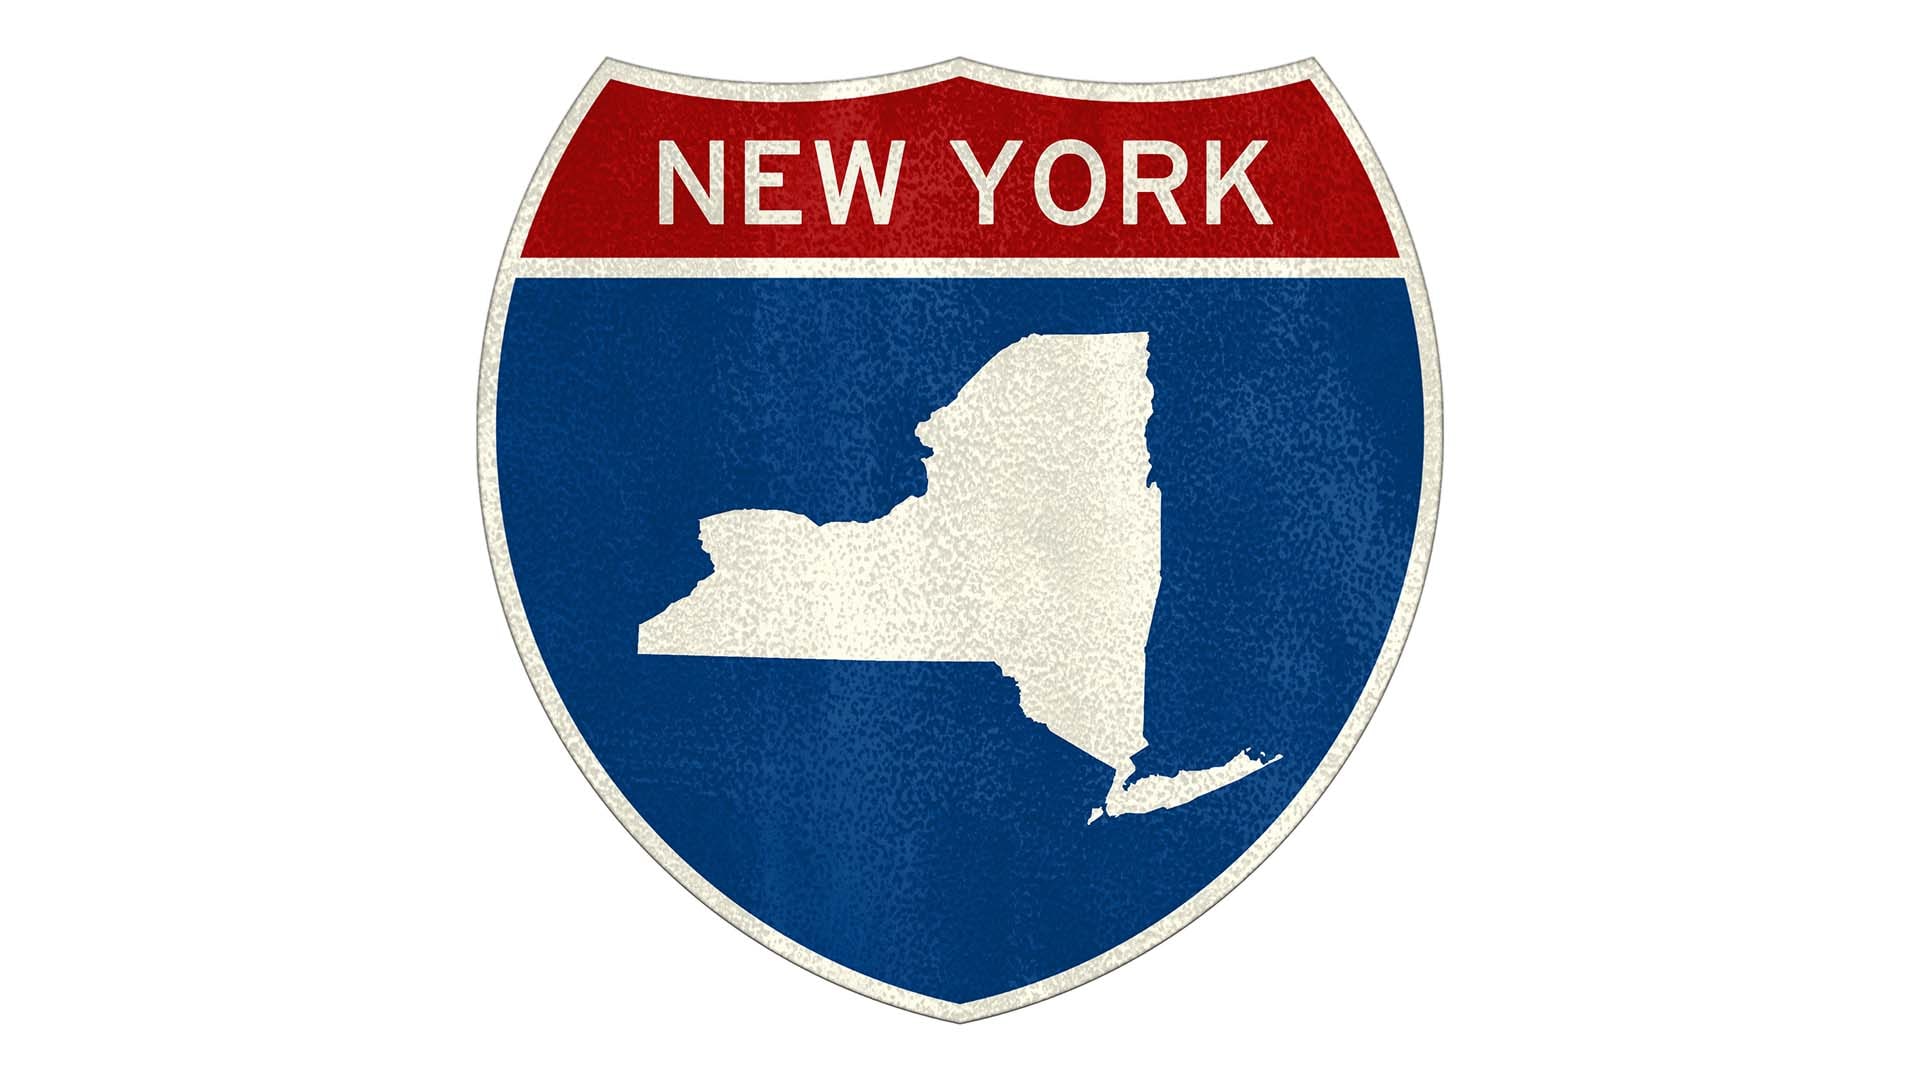 Interstate sign with New York